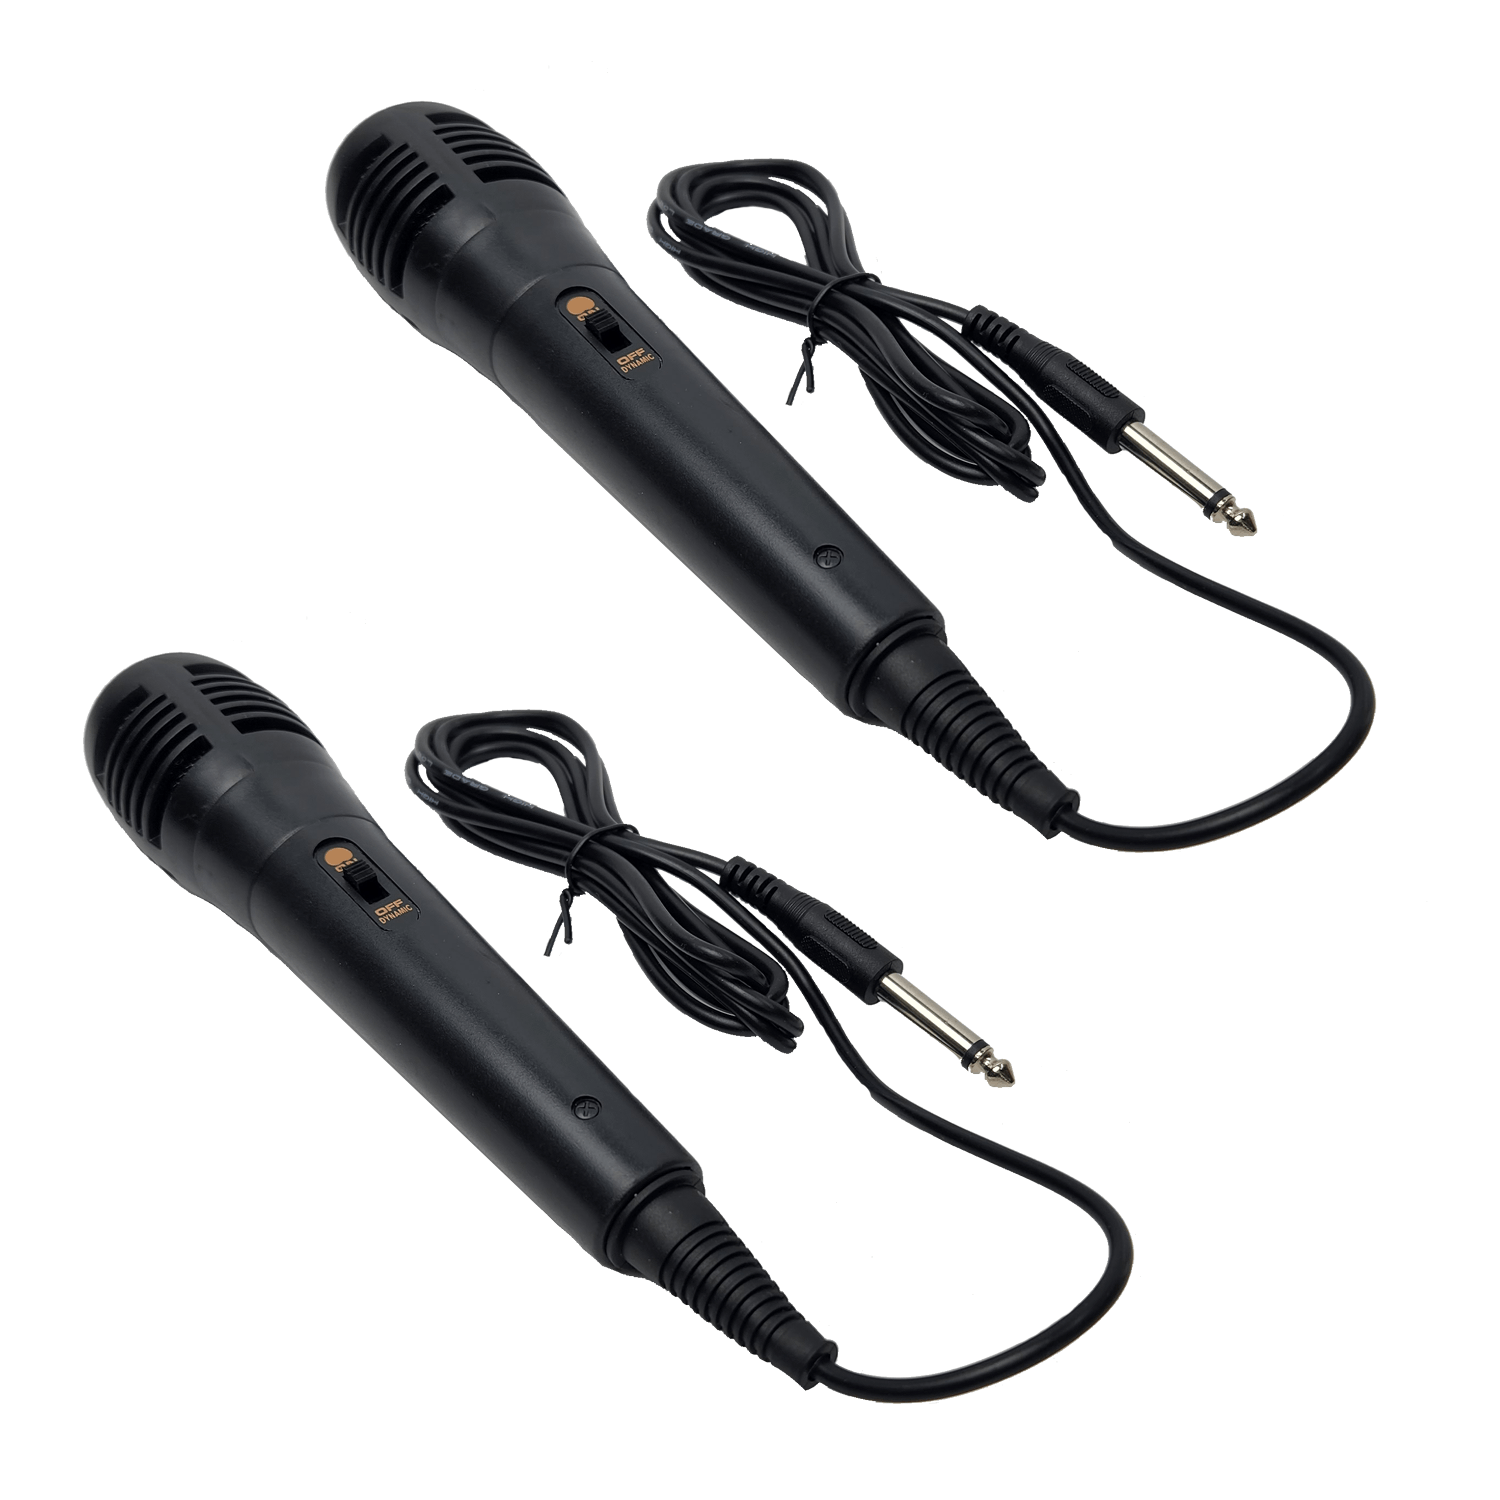 2x Wired Microphones with 2m Cable (6.35mm Jack) - Karaoke Home Entertainment